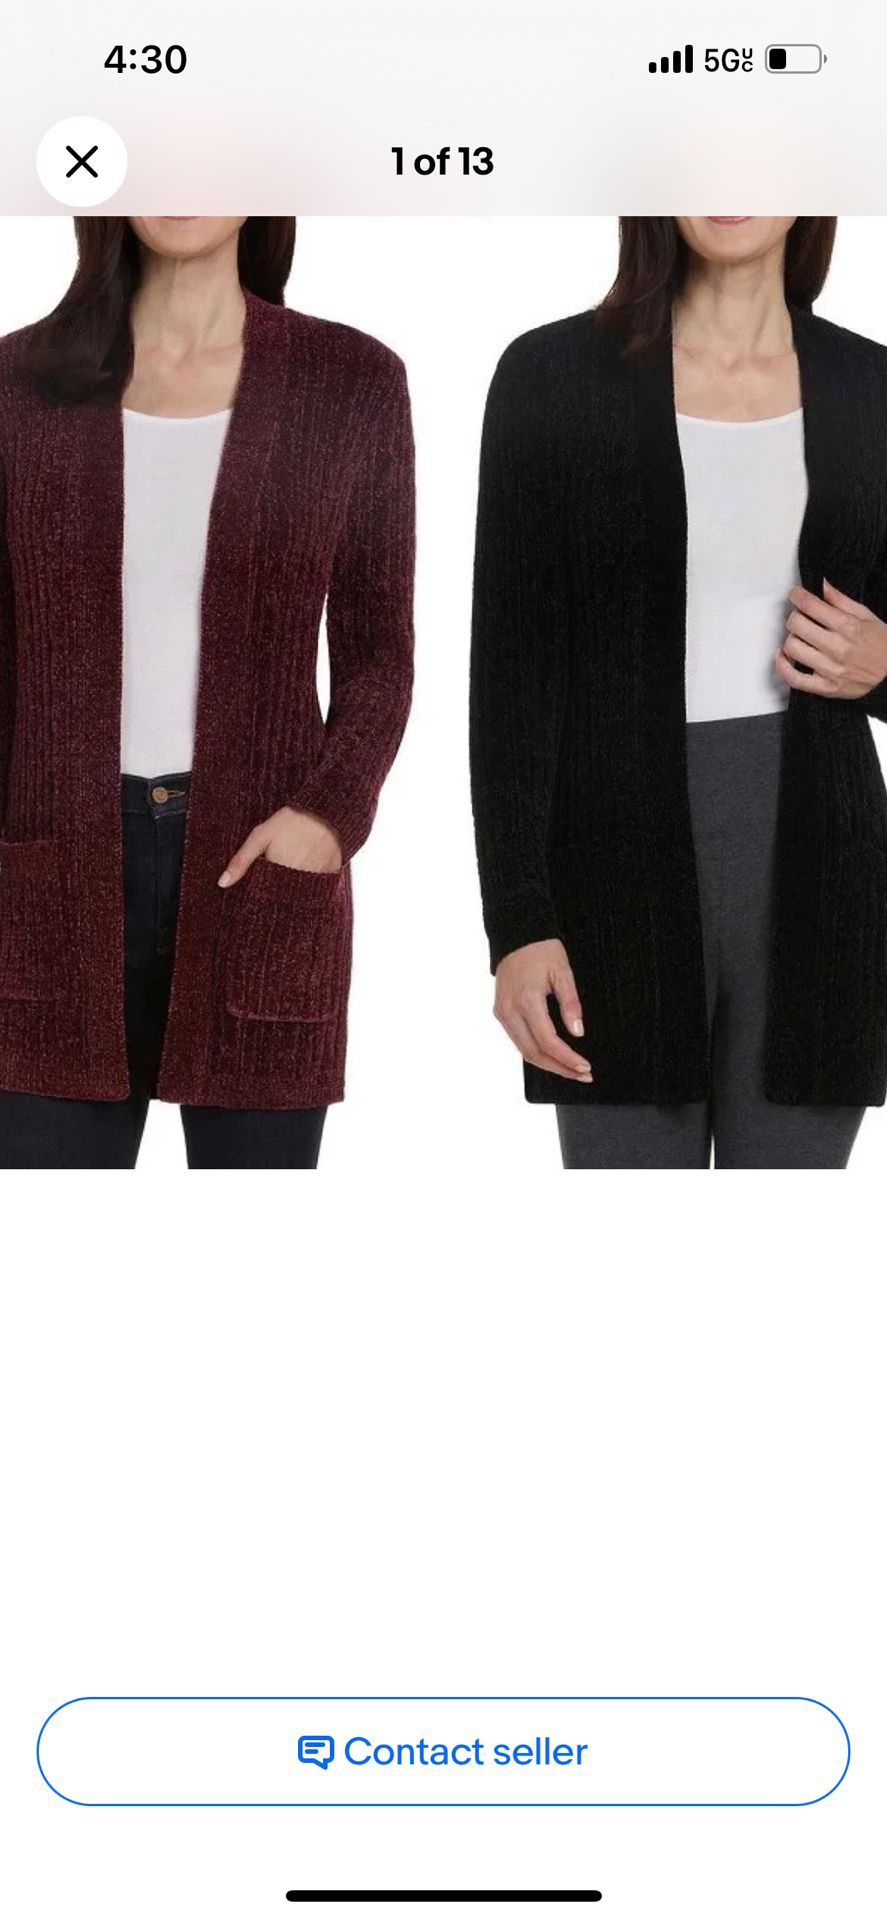 New Matty M Women's Cozy Cable Open Front Chenille Cardigan Sweater US Alpha Regular 